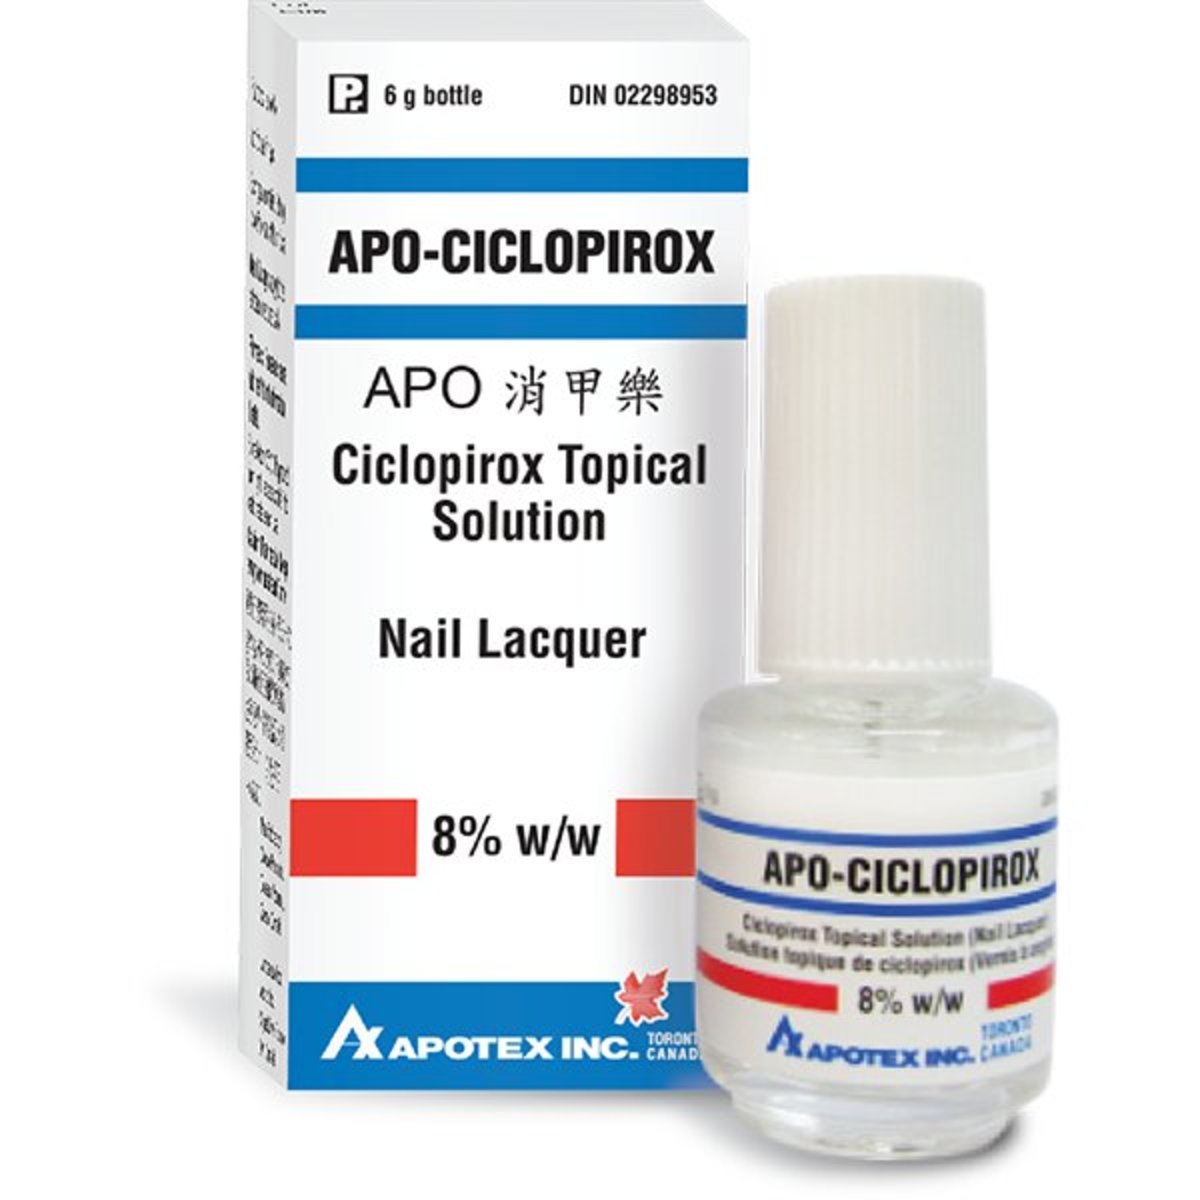 Nailon Nail Lacquer | View Uses, Side Effects, Price | Powpills